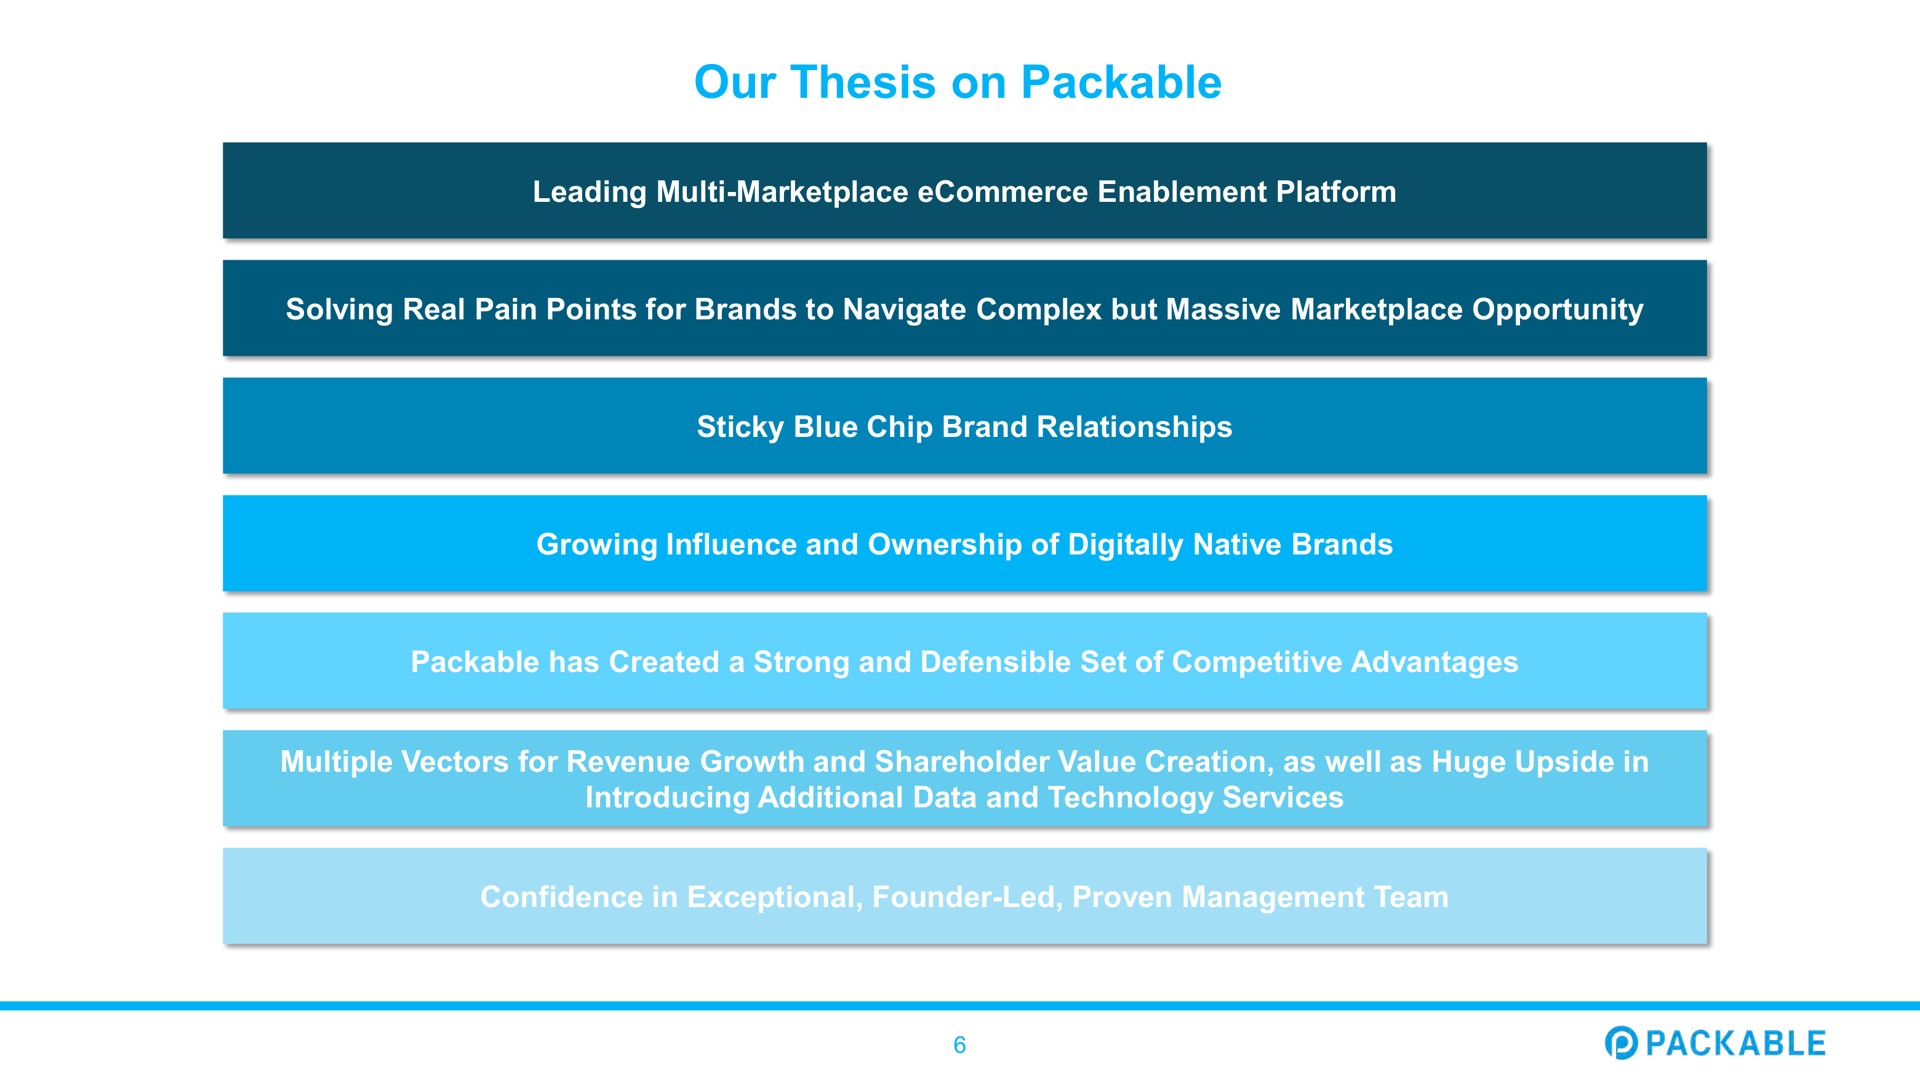 our thesis on packable | Packable